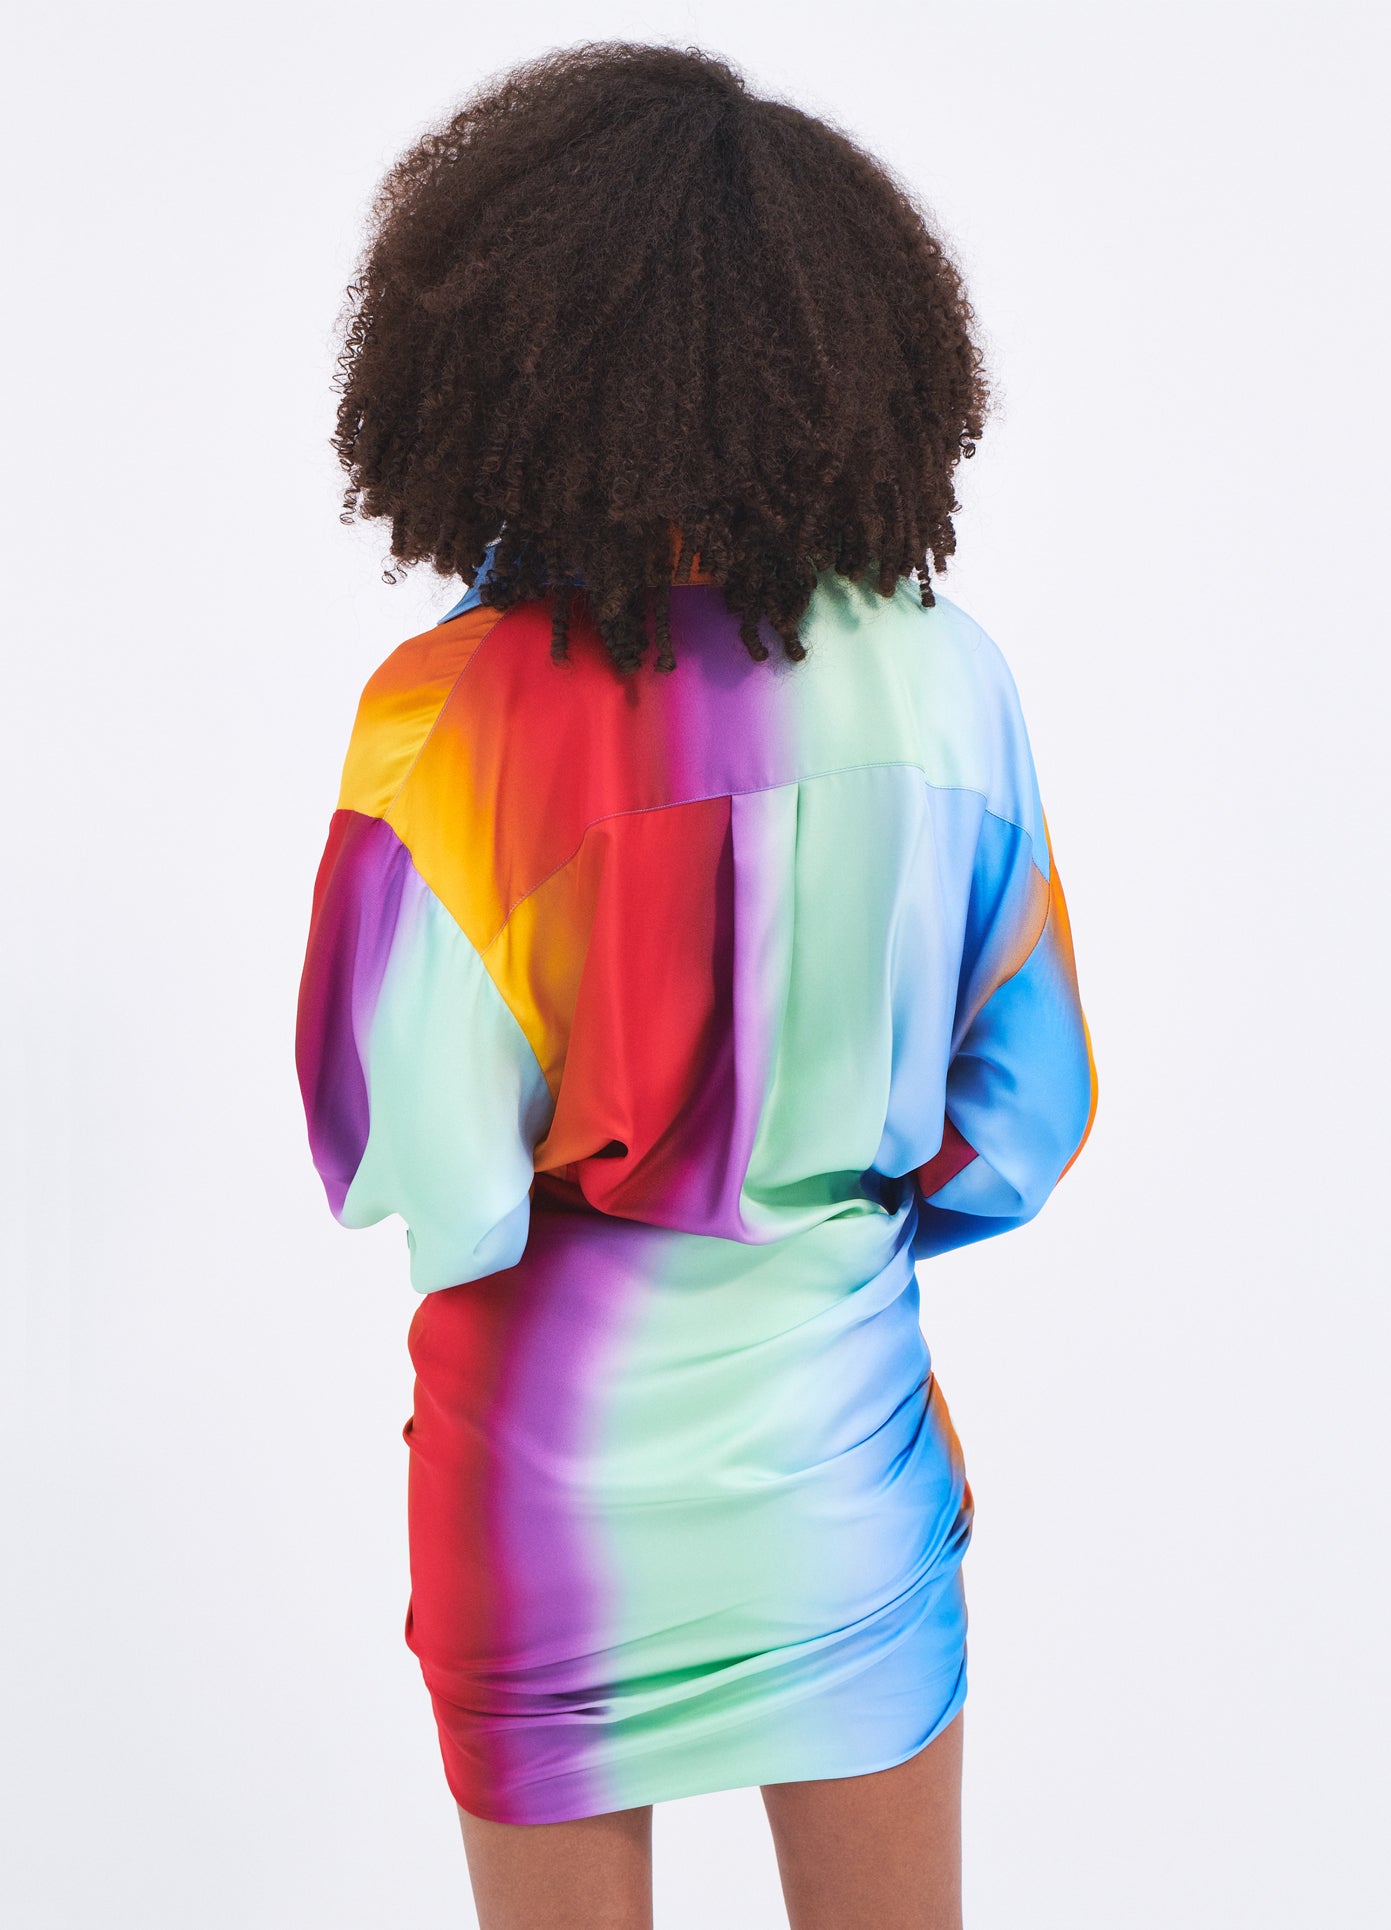 MONSE Rainbow Blur Wrapped Shirt Dress in Multi Colors on model back view